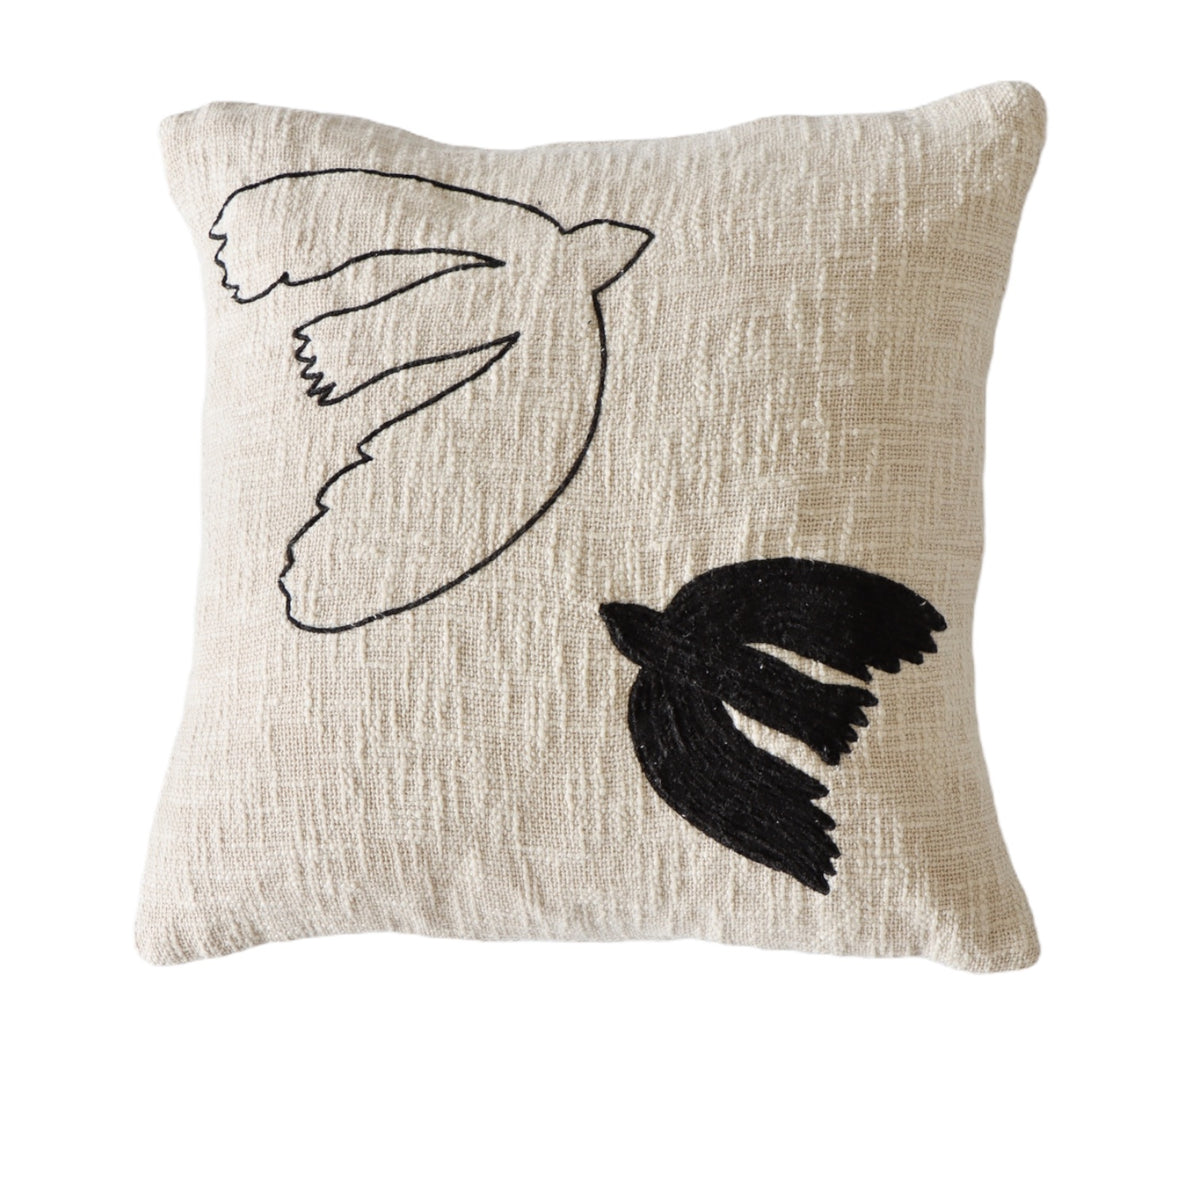 Luna and Skye Embroidered Dove Pillow 18 Inch - Holistic Habitat 